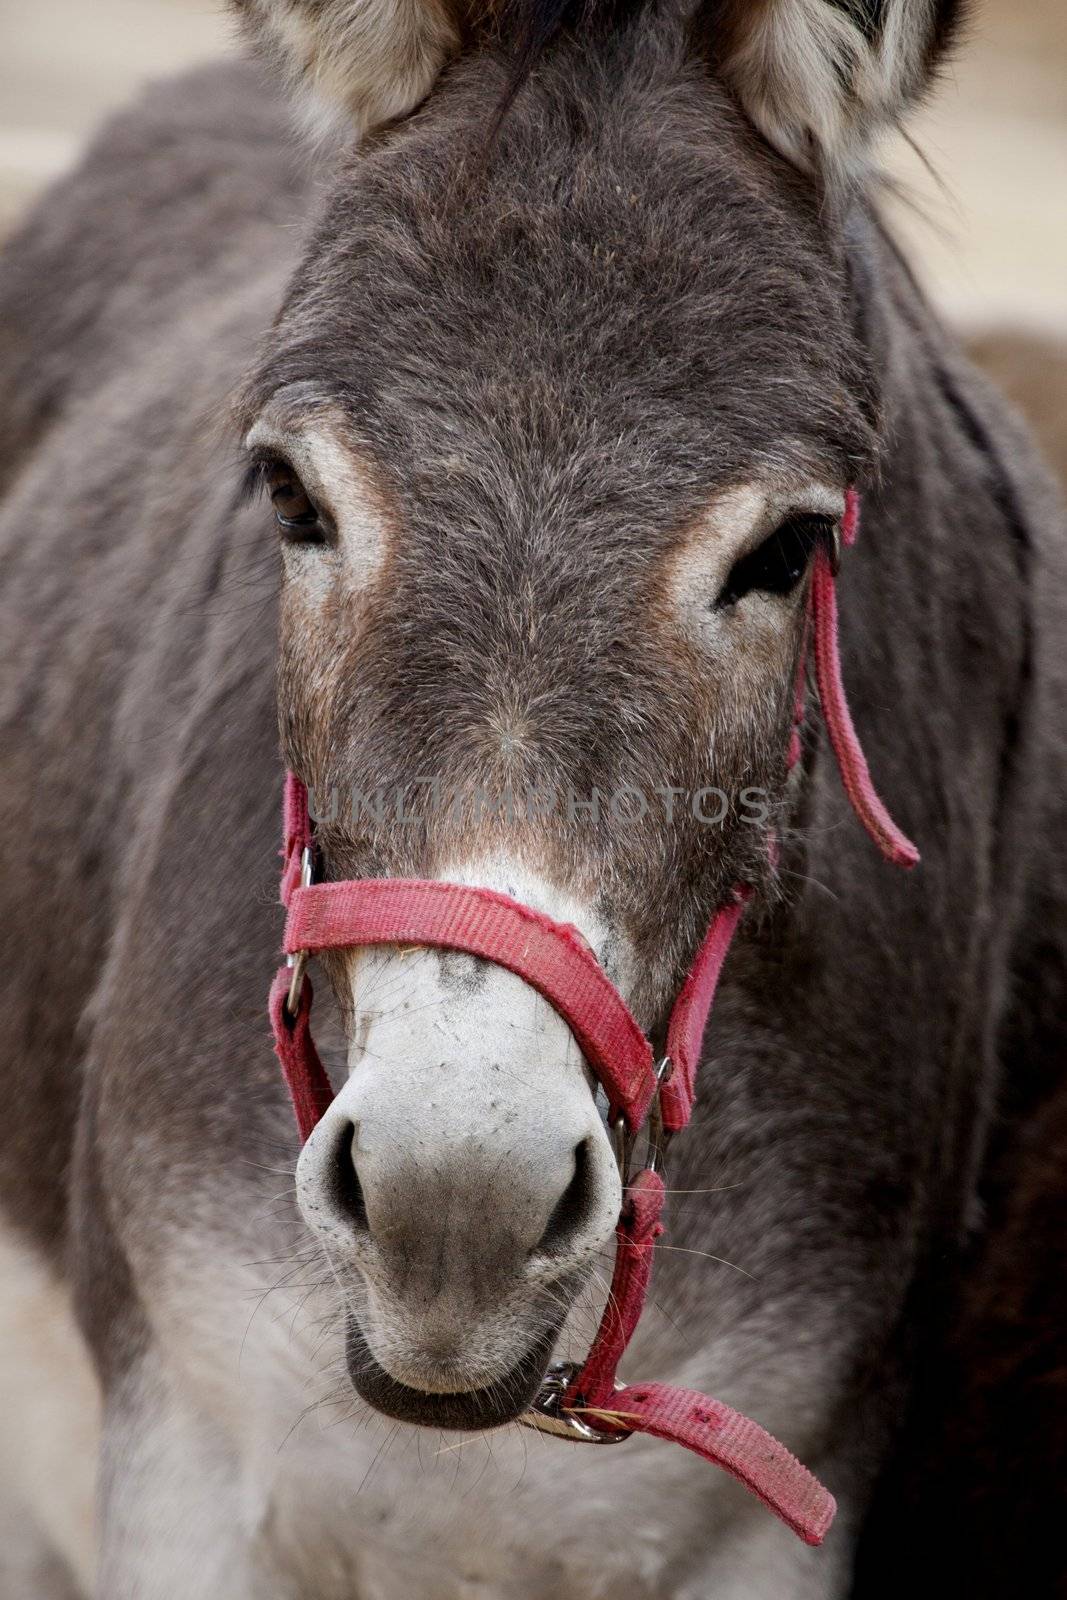 Close up view of the head of a portuguese donkey.